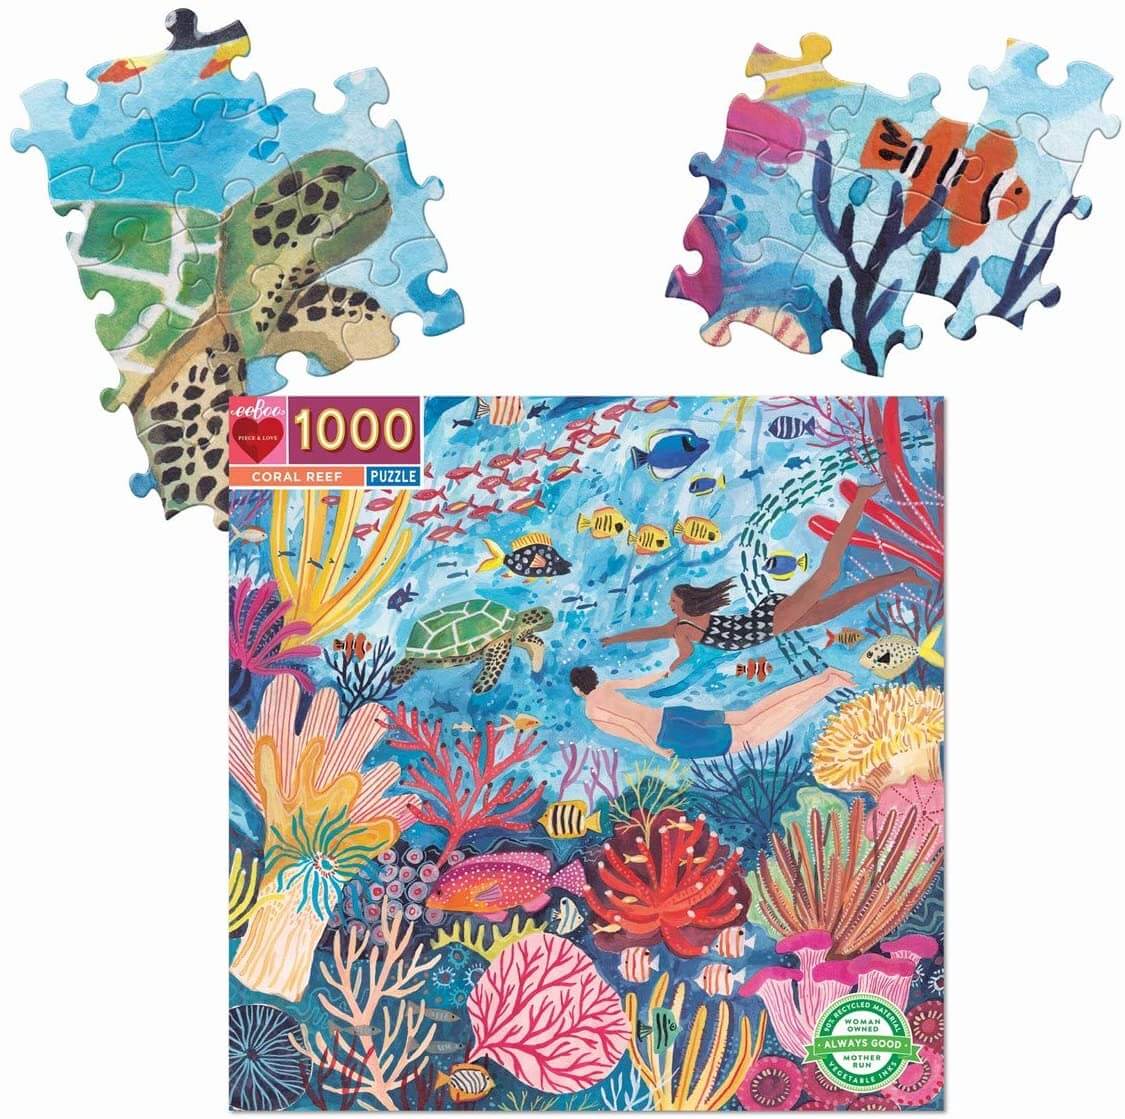 eeBoo - Piece and Love Coral Reef 1000 Piece Square Adult Jigsaw Puzzle photo of box and puzzle pieces